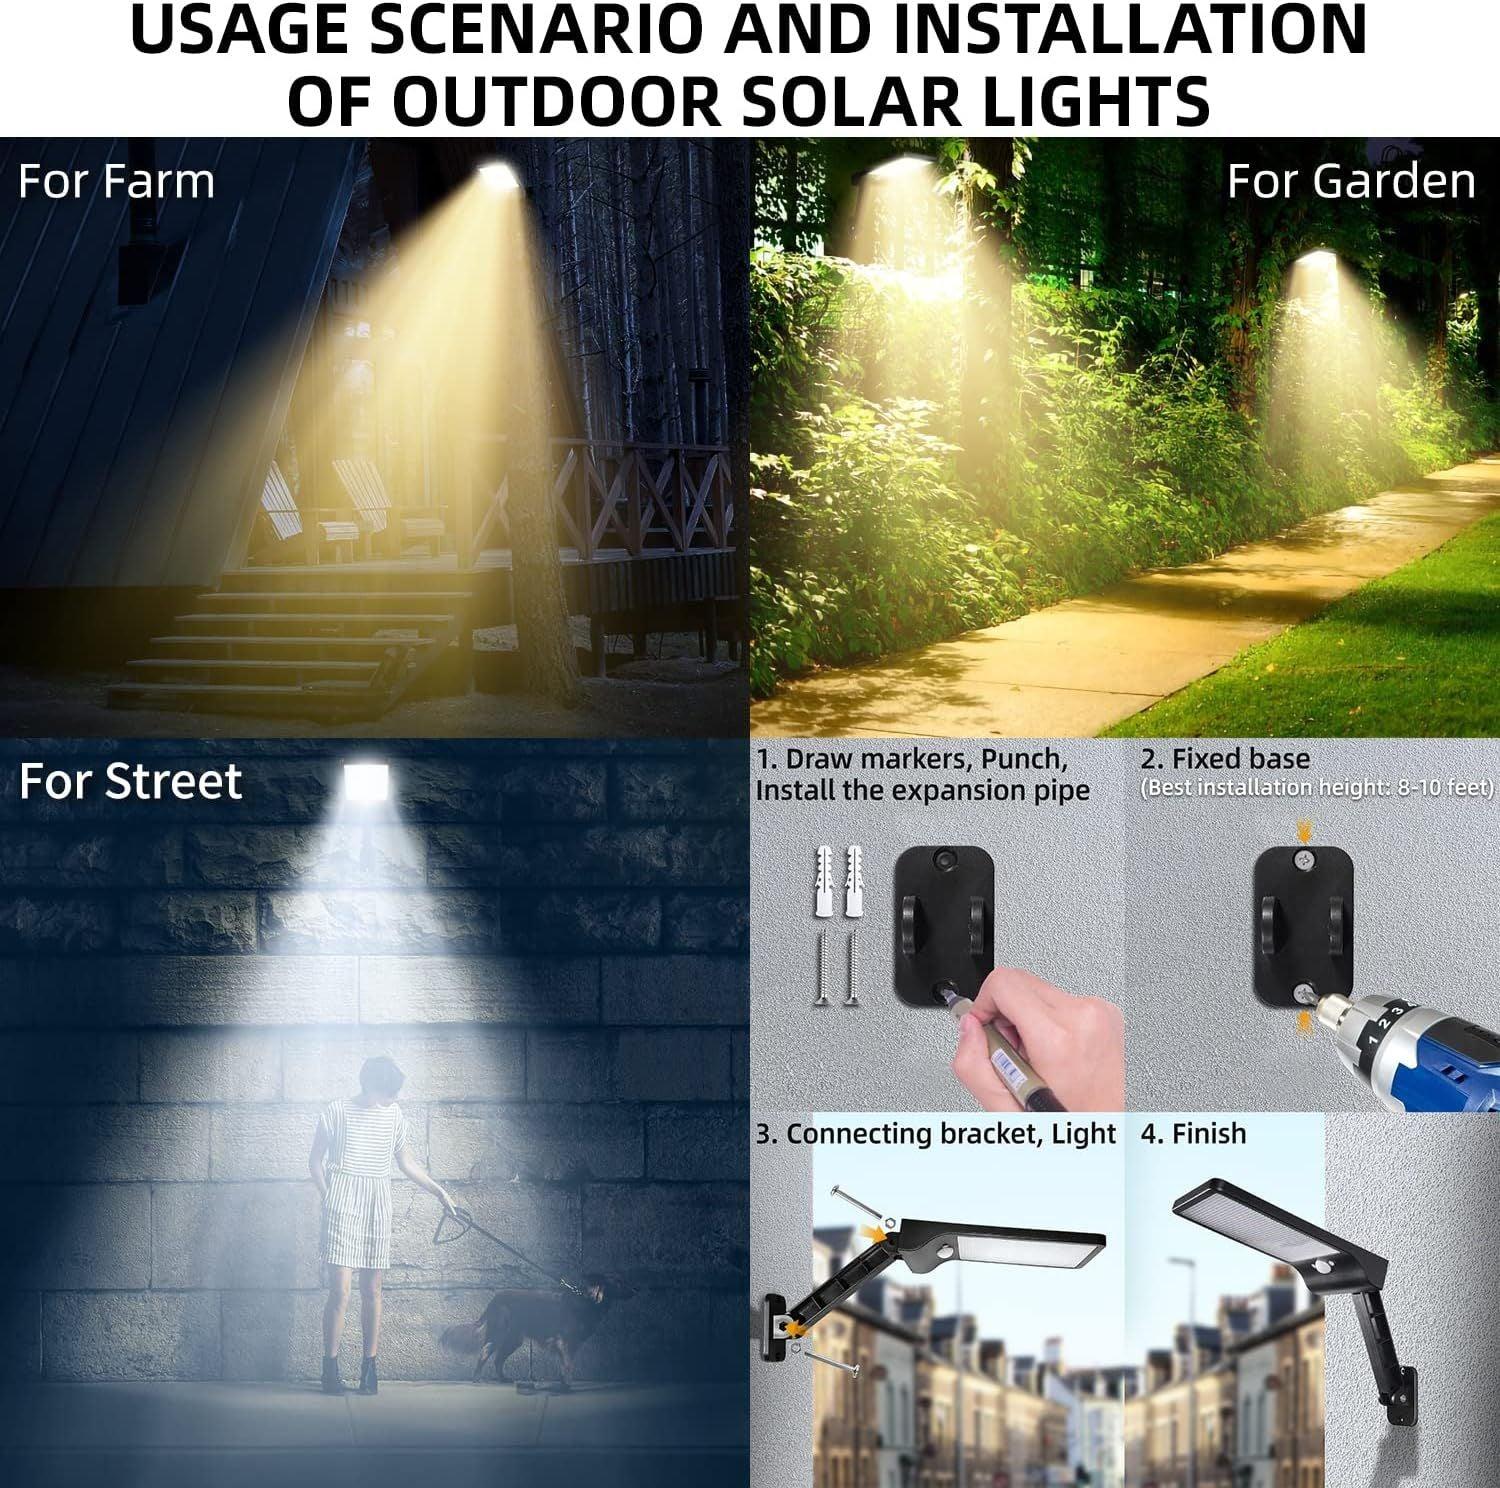 LazyPro 2 Pack Outdoor Solar Flood Lights Wireless 48 LED Waterproof Security Motion Sensor Light With 3 Modes - Lazy Pro